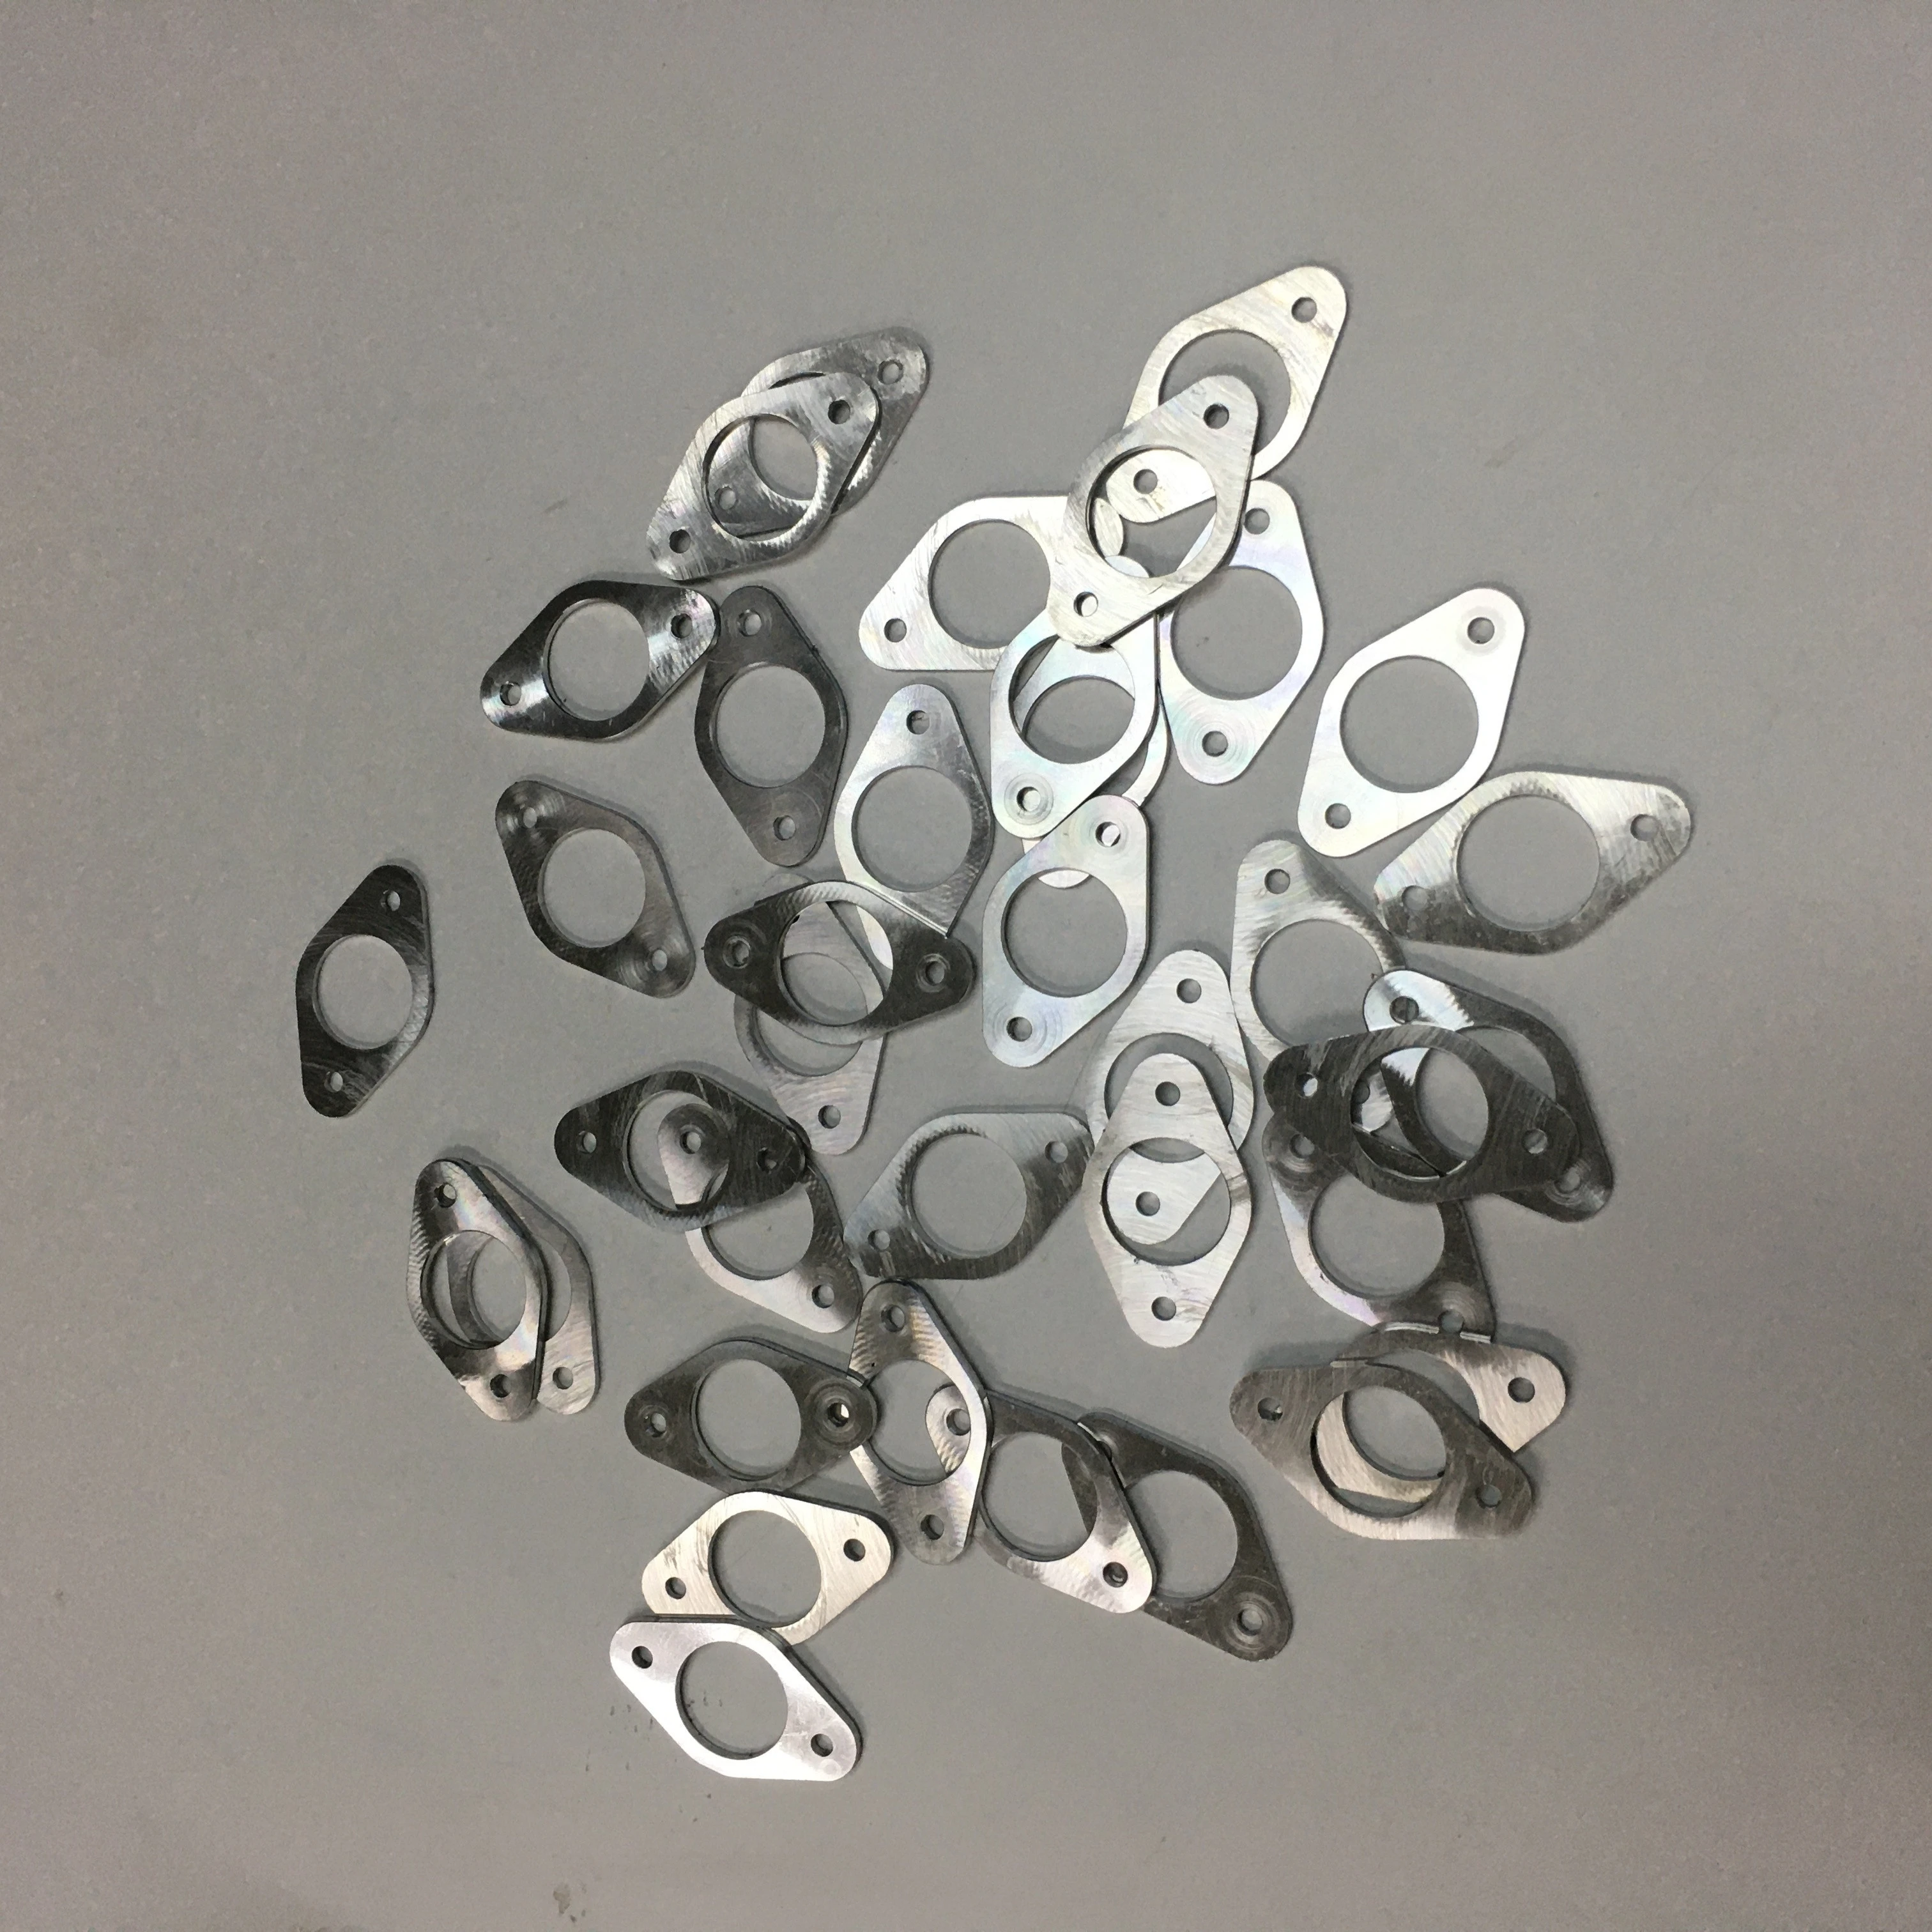 cnc machining embroidery machine spare part electroless nickel plating of shiny bright finish